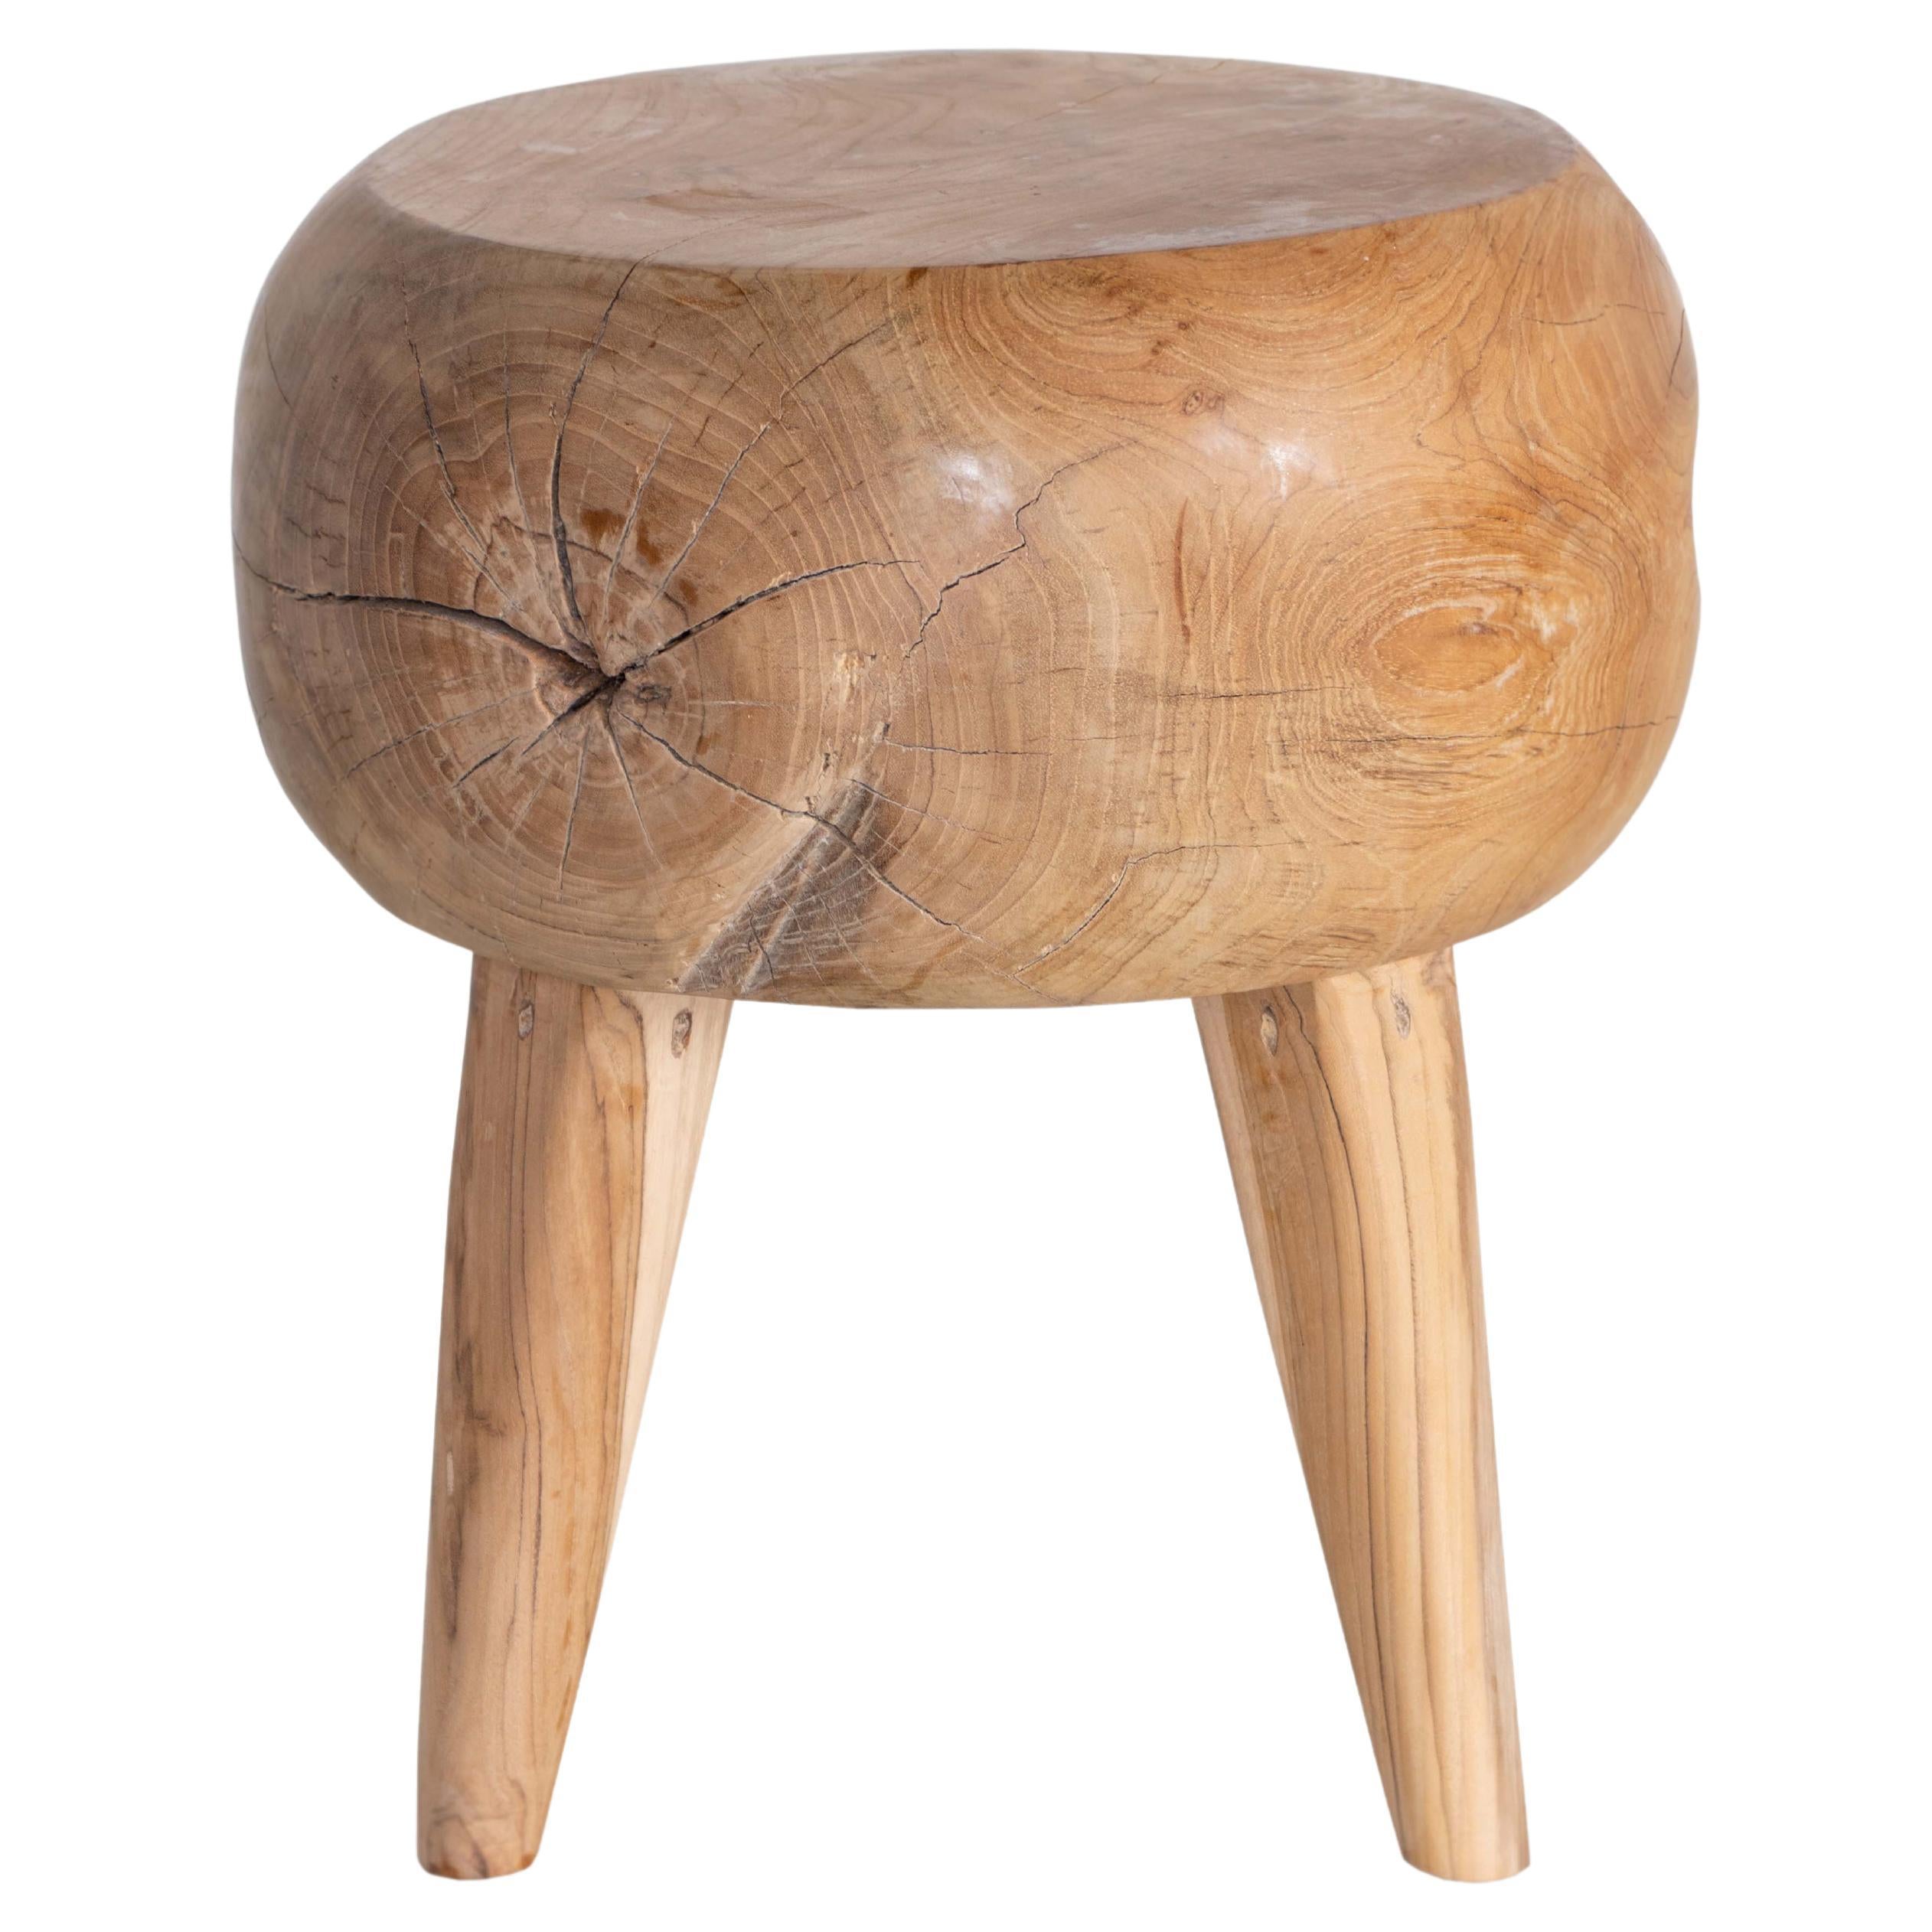 Four Leg Wood End Table/Stool For Sale at 1stDibs